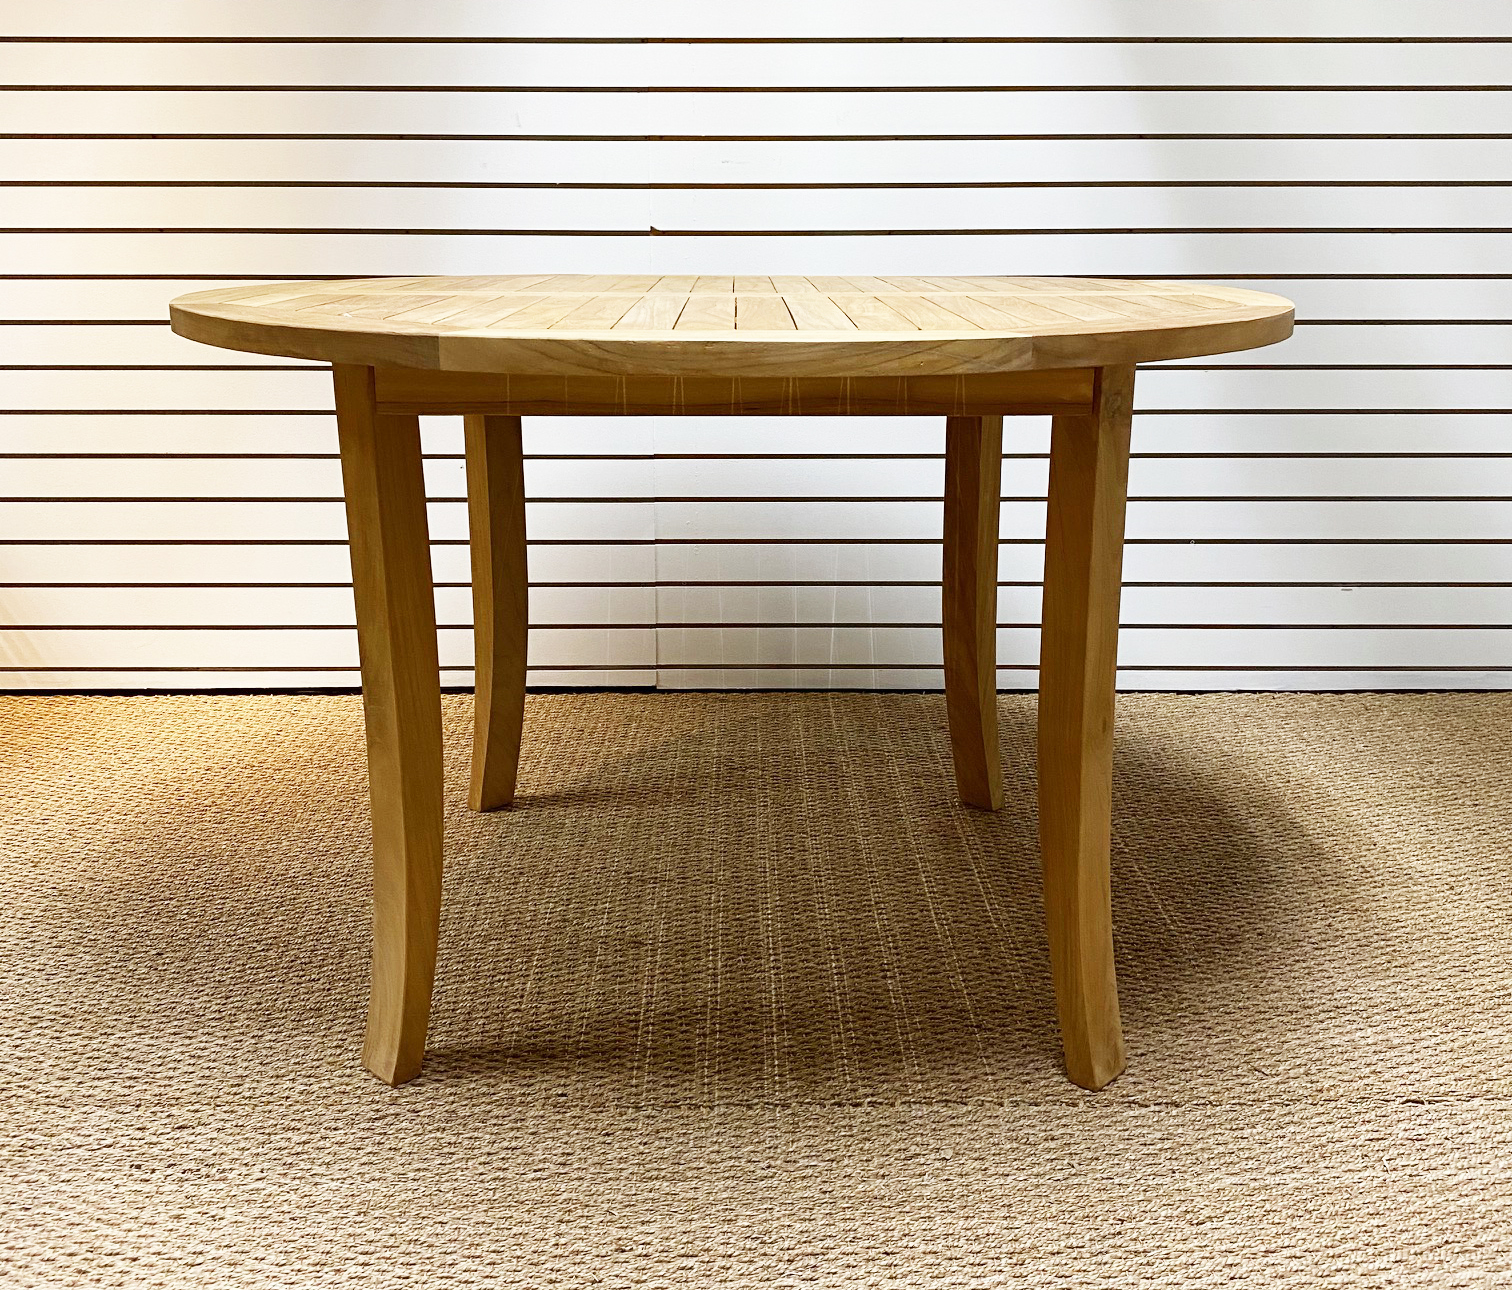 The Lahaina Round Dining Table is a round, four-legged table with symmetrical teak slats across the top. It can look at home in a boho chic kitchen or as a contemporary furniture piece.